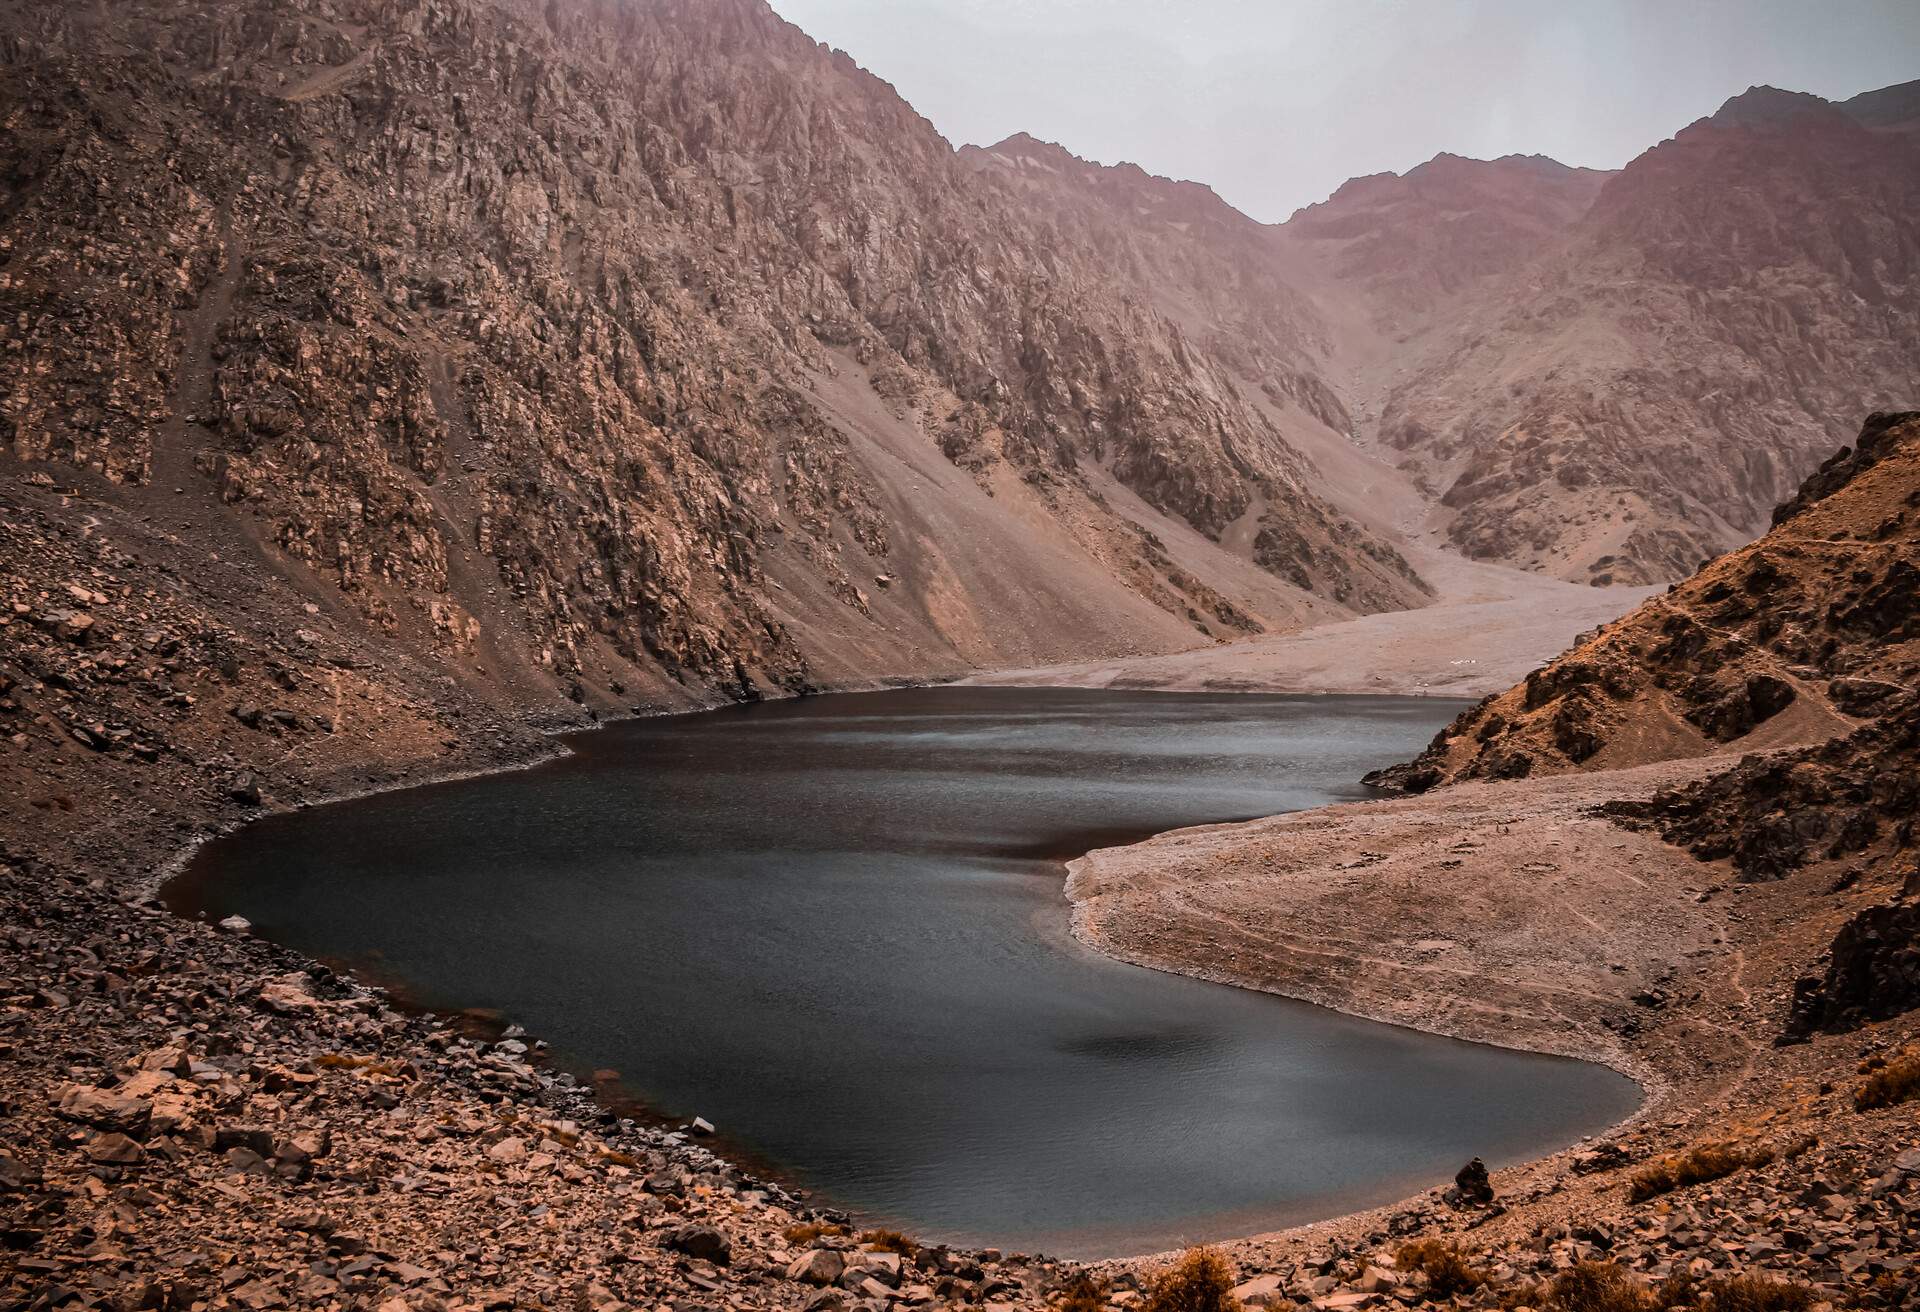 The ifni Lake in the national park of toubkal